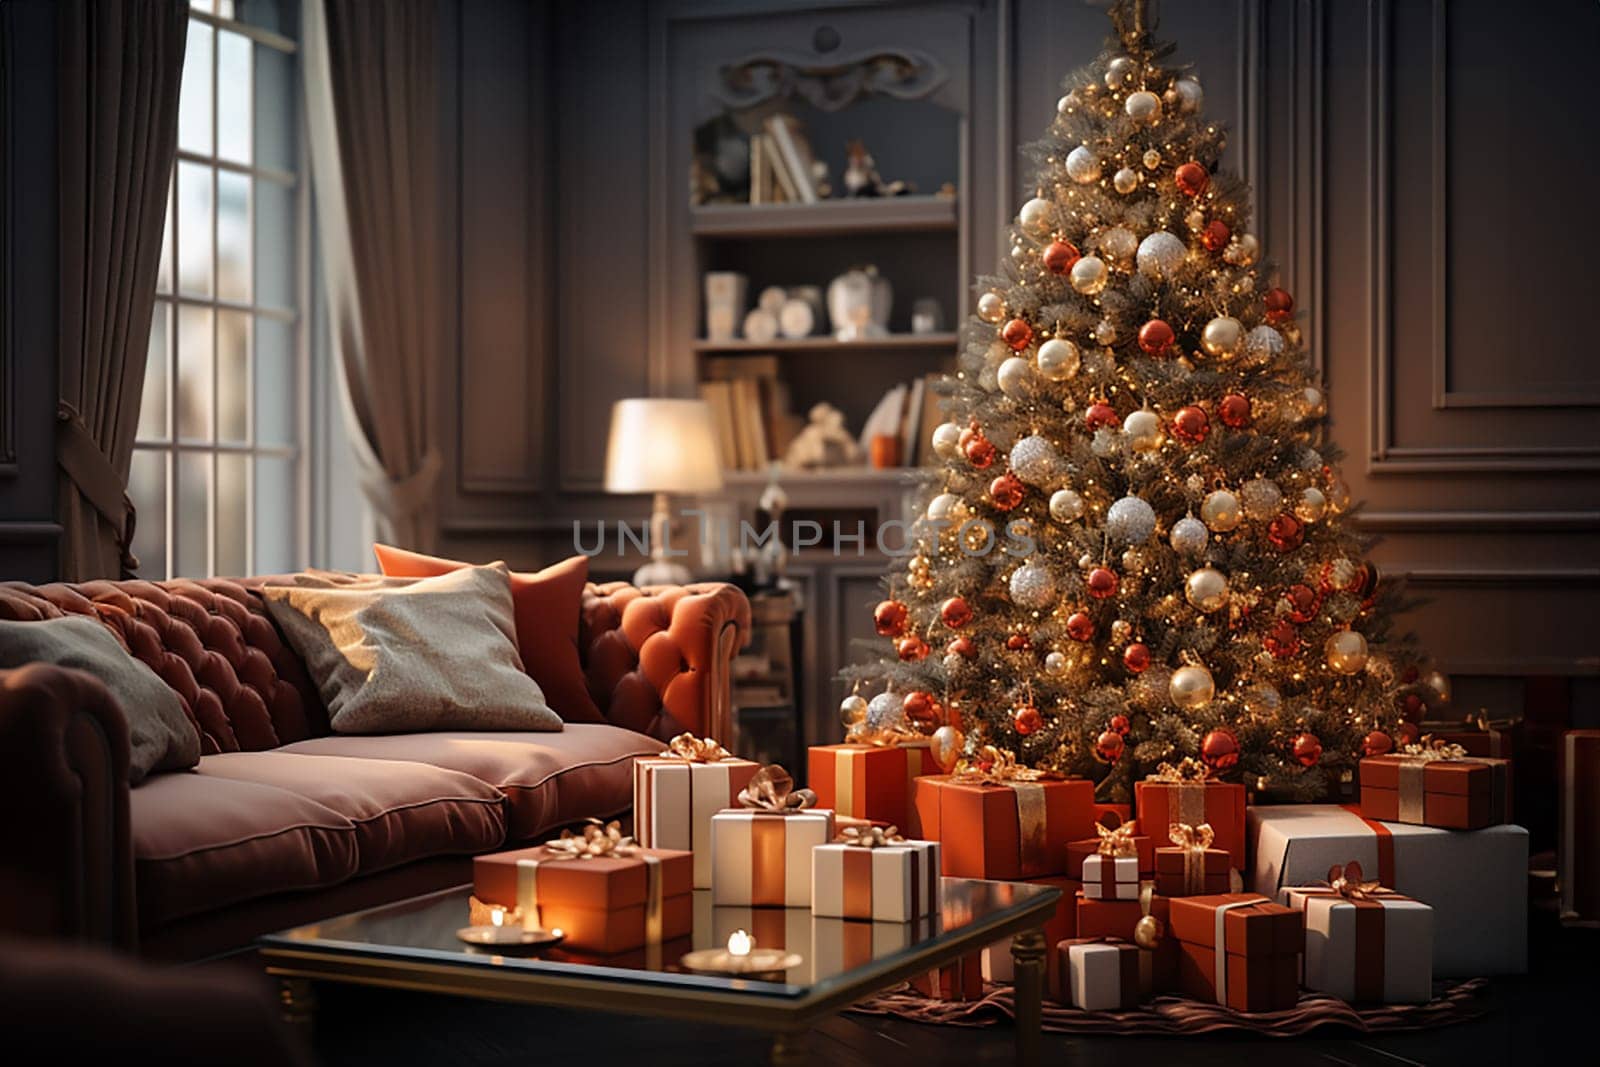 Bright room decorated for Christmas or New Year with a Christmas tree, a sofa, an illuminated window creating a warm festive atmosphere.